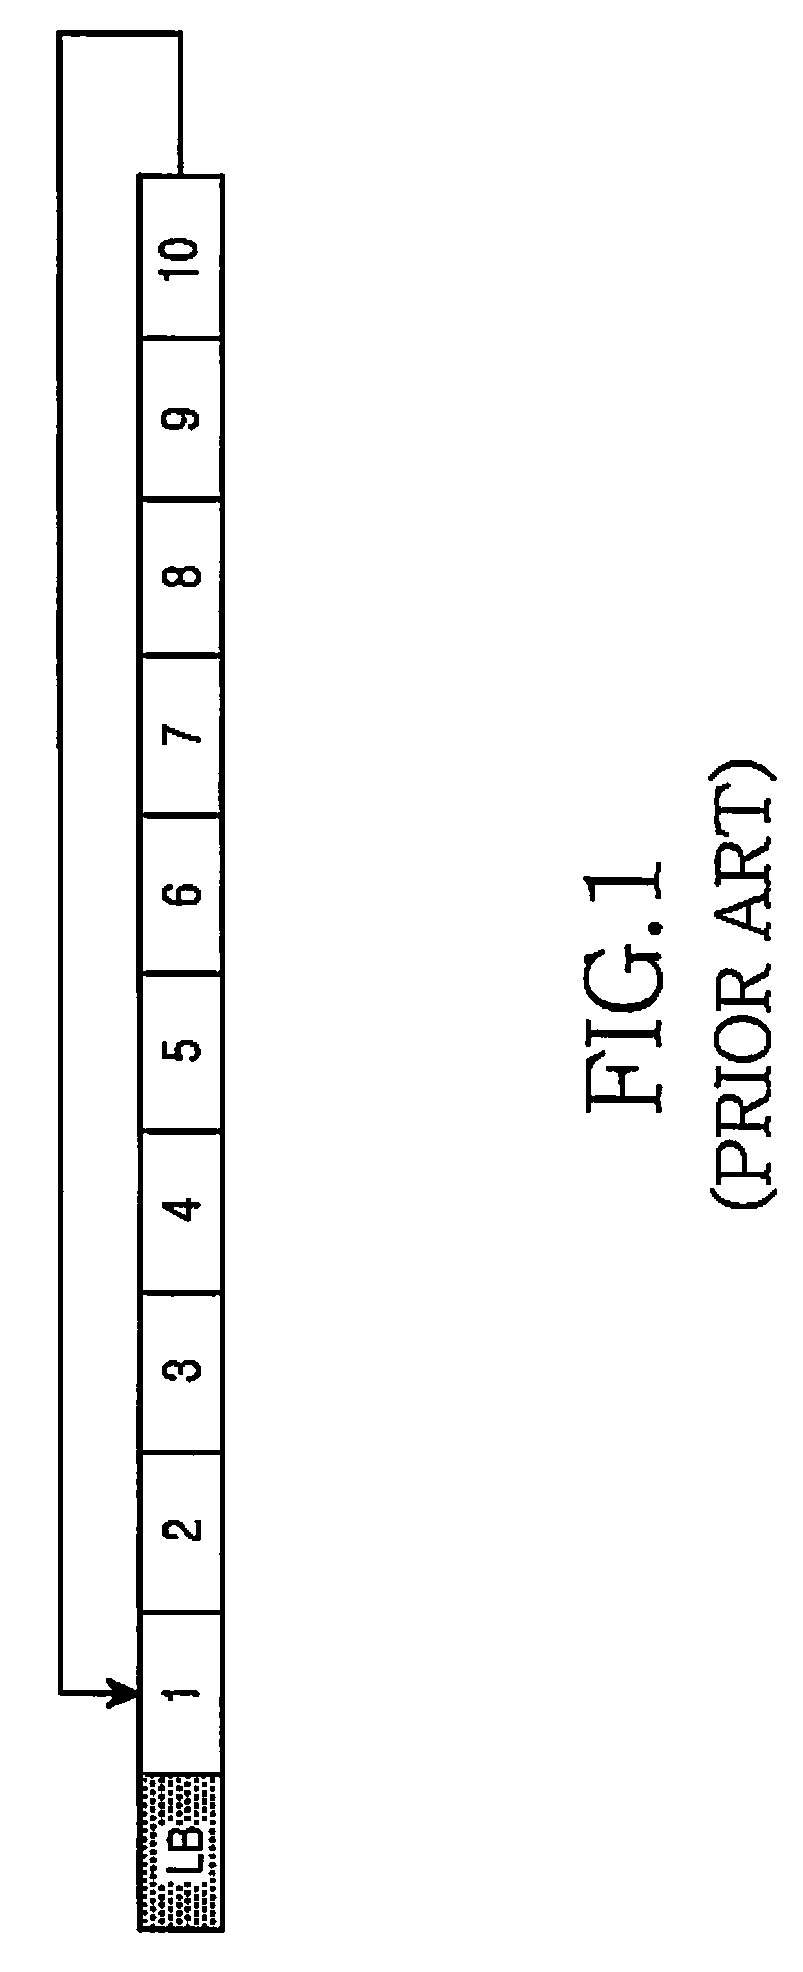 Apparatus and method for scanning frequency in mobile terminal